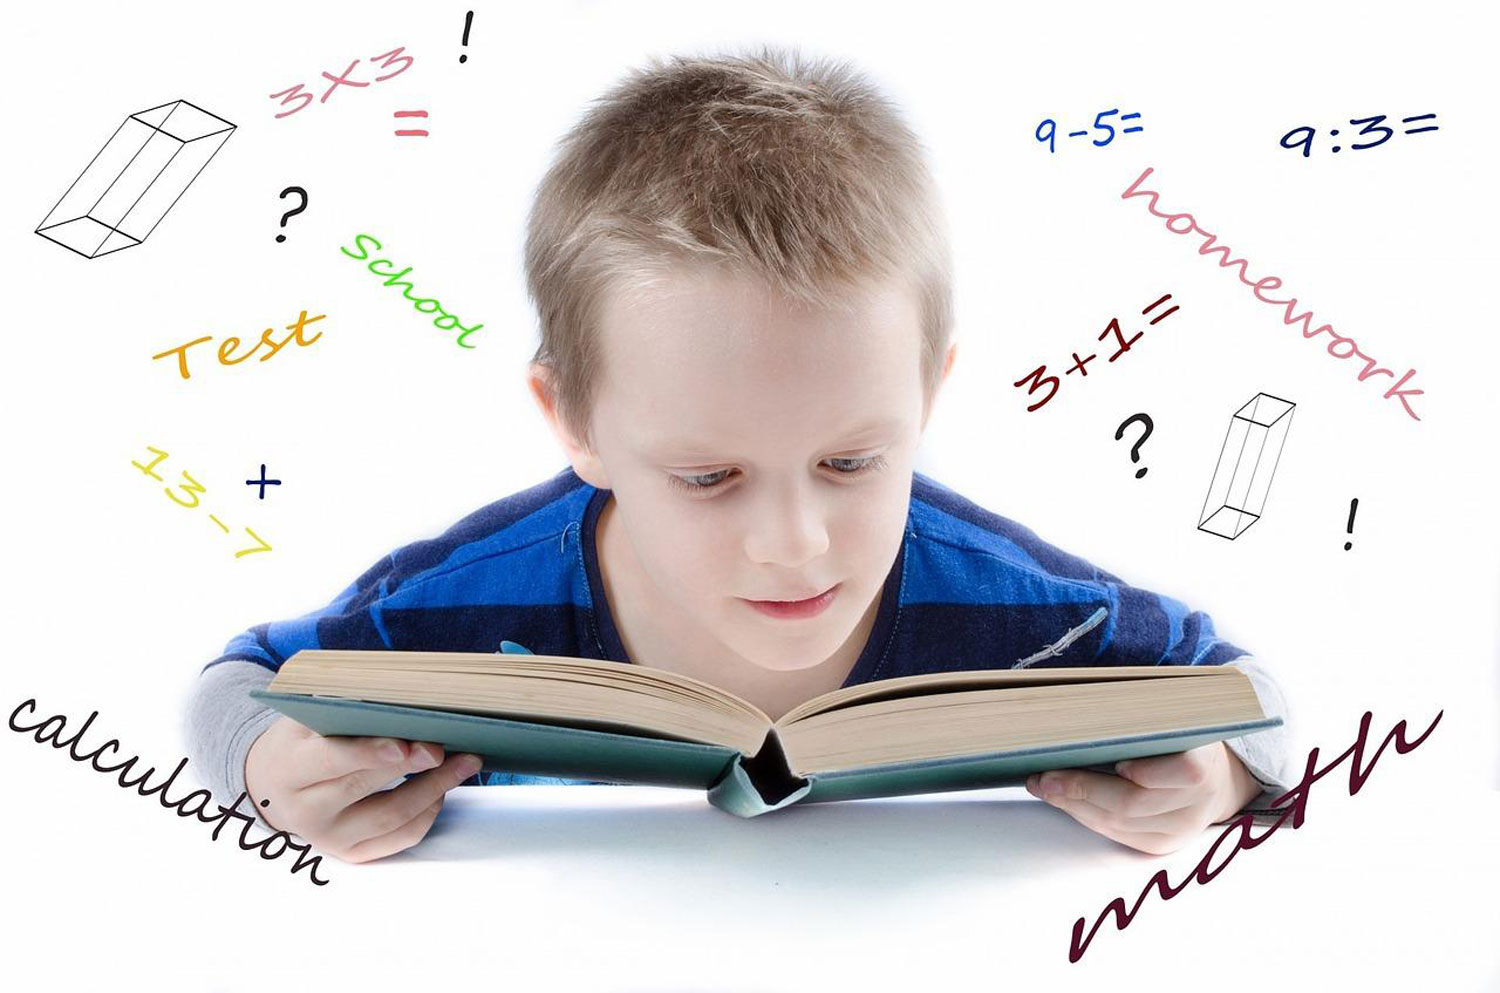 Child reading a book surrounded by math words and equations